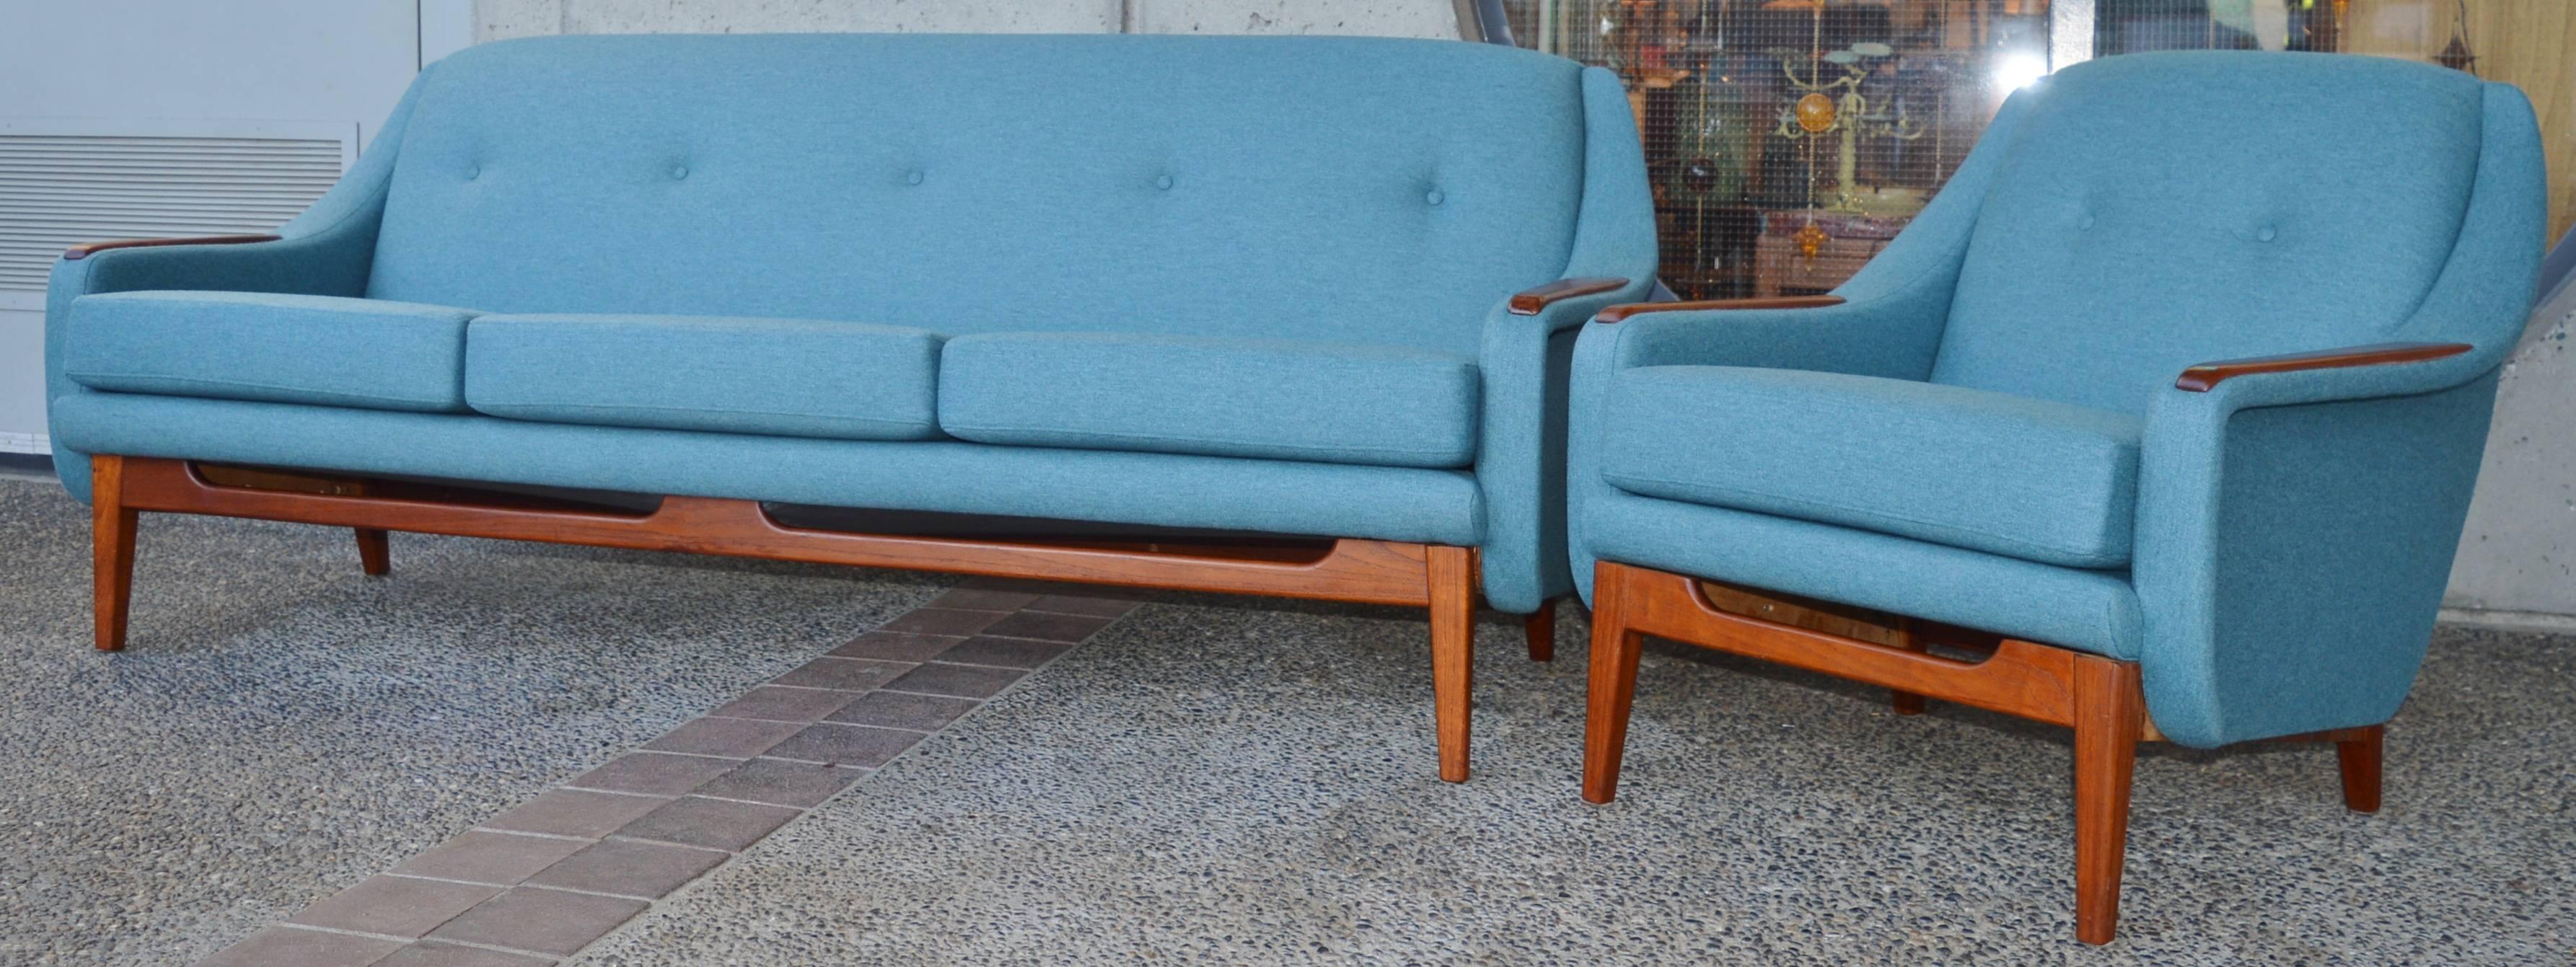 This lovely Danish modern / Scandinavian teak couch and lounge chair are spectacular! The wood work has been refinished and it has been completely restored, stripped to the frame, with new springs, Pirelli rubber strapping, quality foam and a